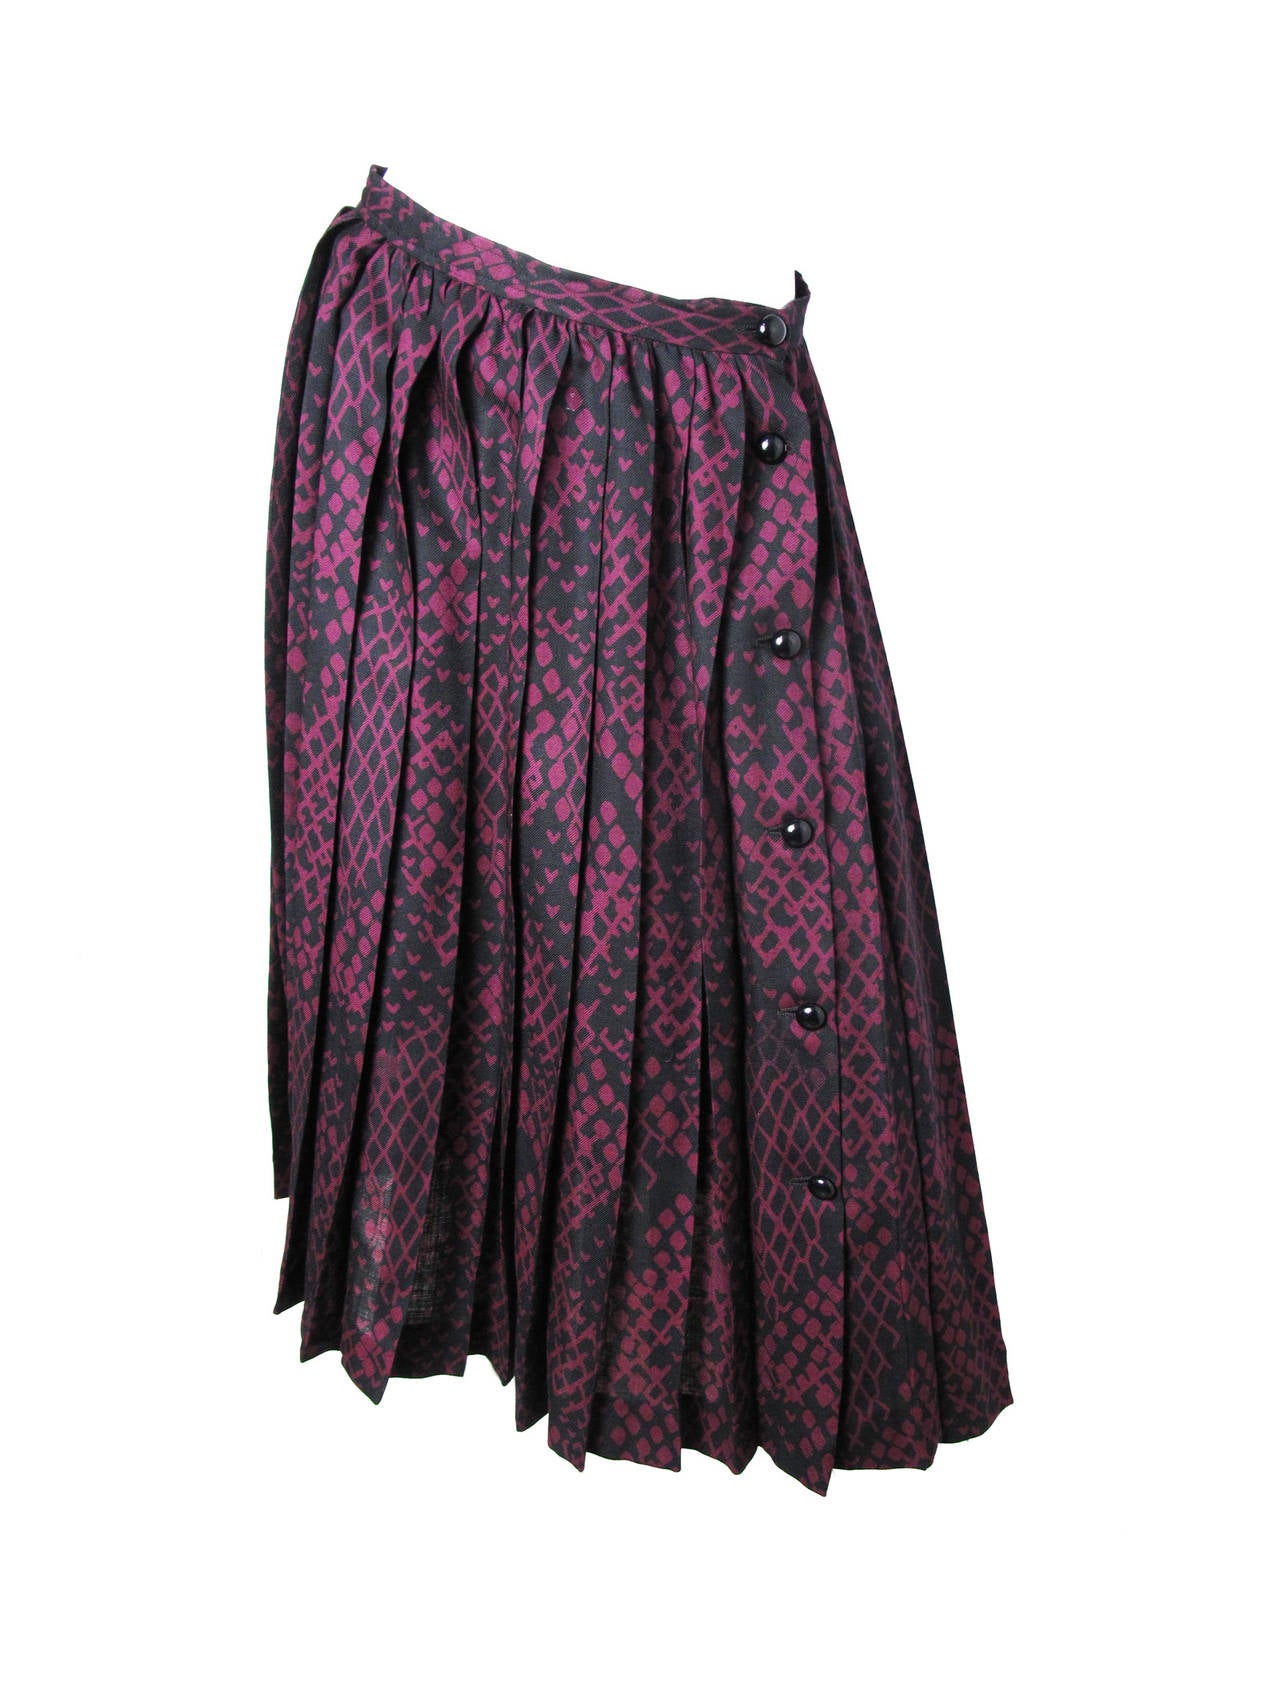 Valentino purple and black wool printed blouse with long attached scarf  and pleated skirt .   Condition: Excellent. Size 44 / current US 4 - 6

Top: 39